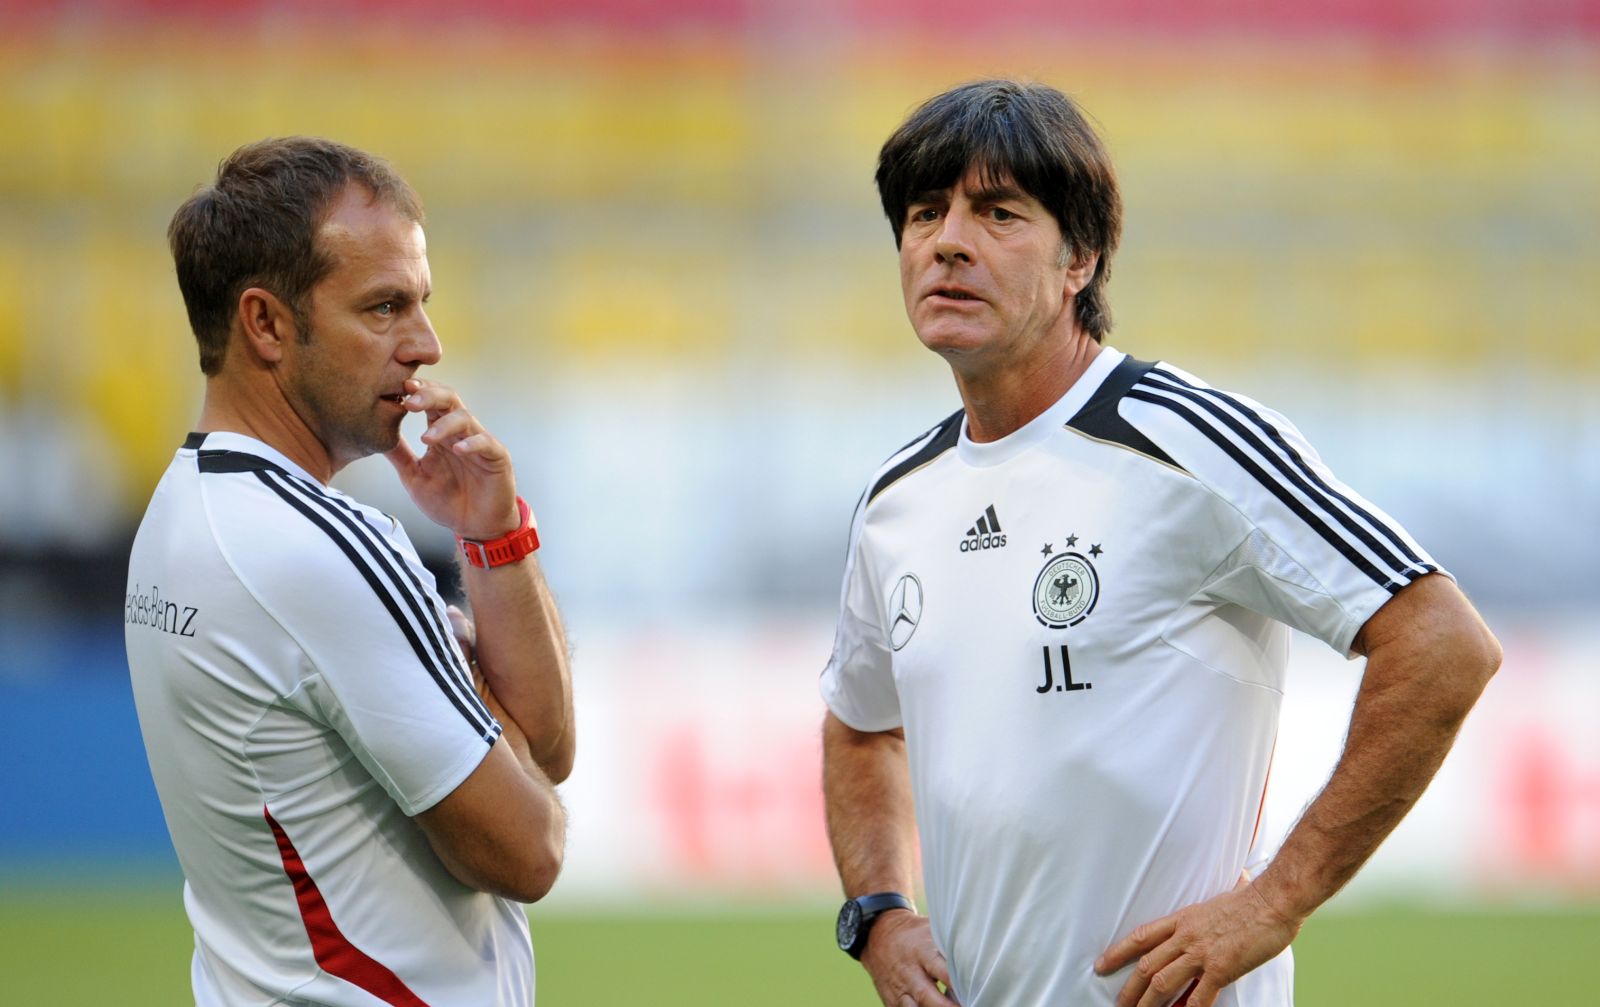 epa09226367 (FILE) - German national soccer team head coach Joachim Loew (R) and assistant coach Hansi Flick (L) lead their team's training session in Munich, Germany, 05 September 2013 (re-issued on 25 May 2021). Hansi Flick will become new head coach of the German national soccer team, the German Football Association (DFB) confirmed on 25 May 2021. Flick will succeed incumbent coach Joachim Loew after the UEFA EURO 2020 soccer championship.  EPA/ANDREAS GEBERT  GERMANY OUT *** Local Caption *** 50983253